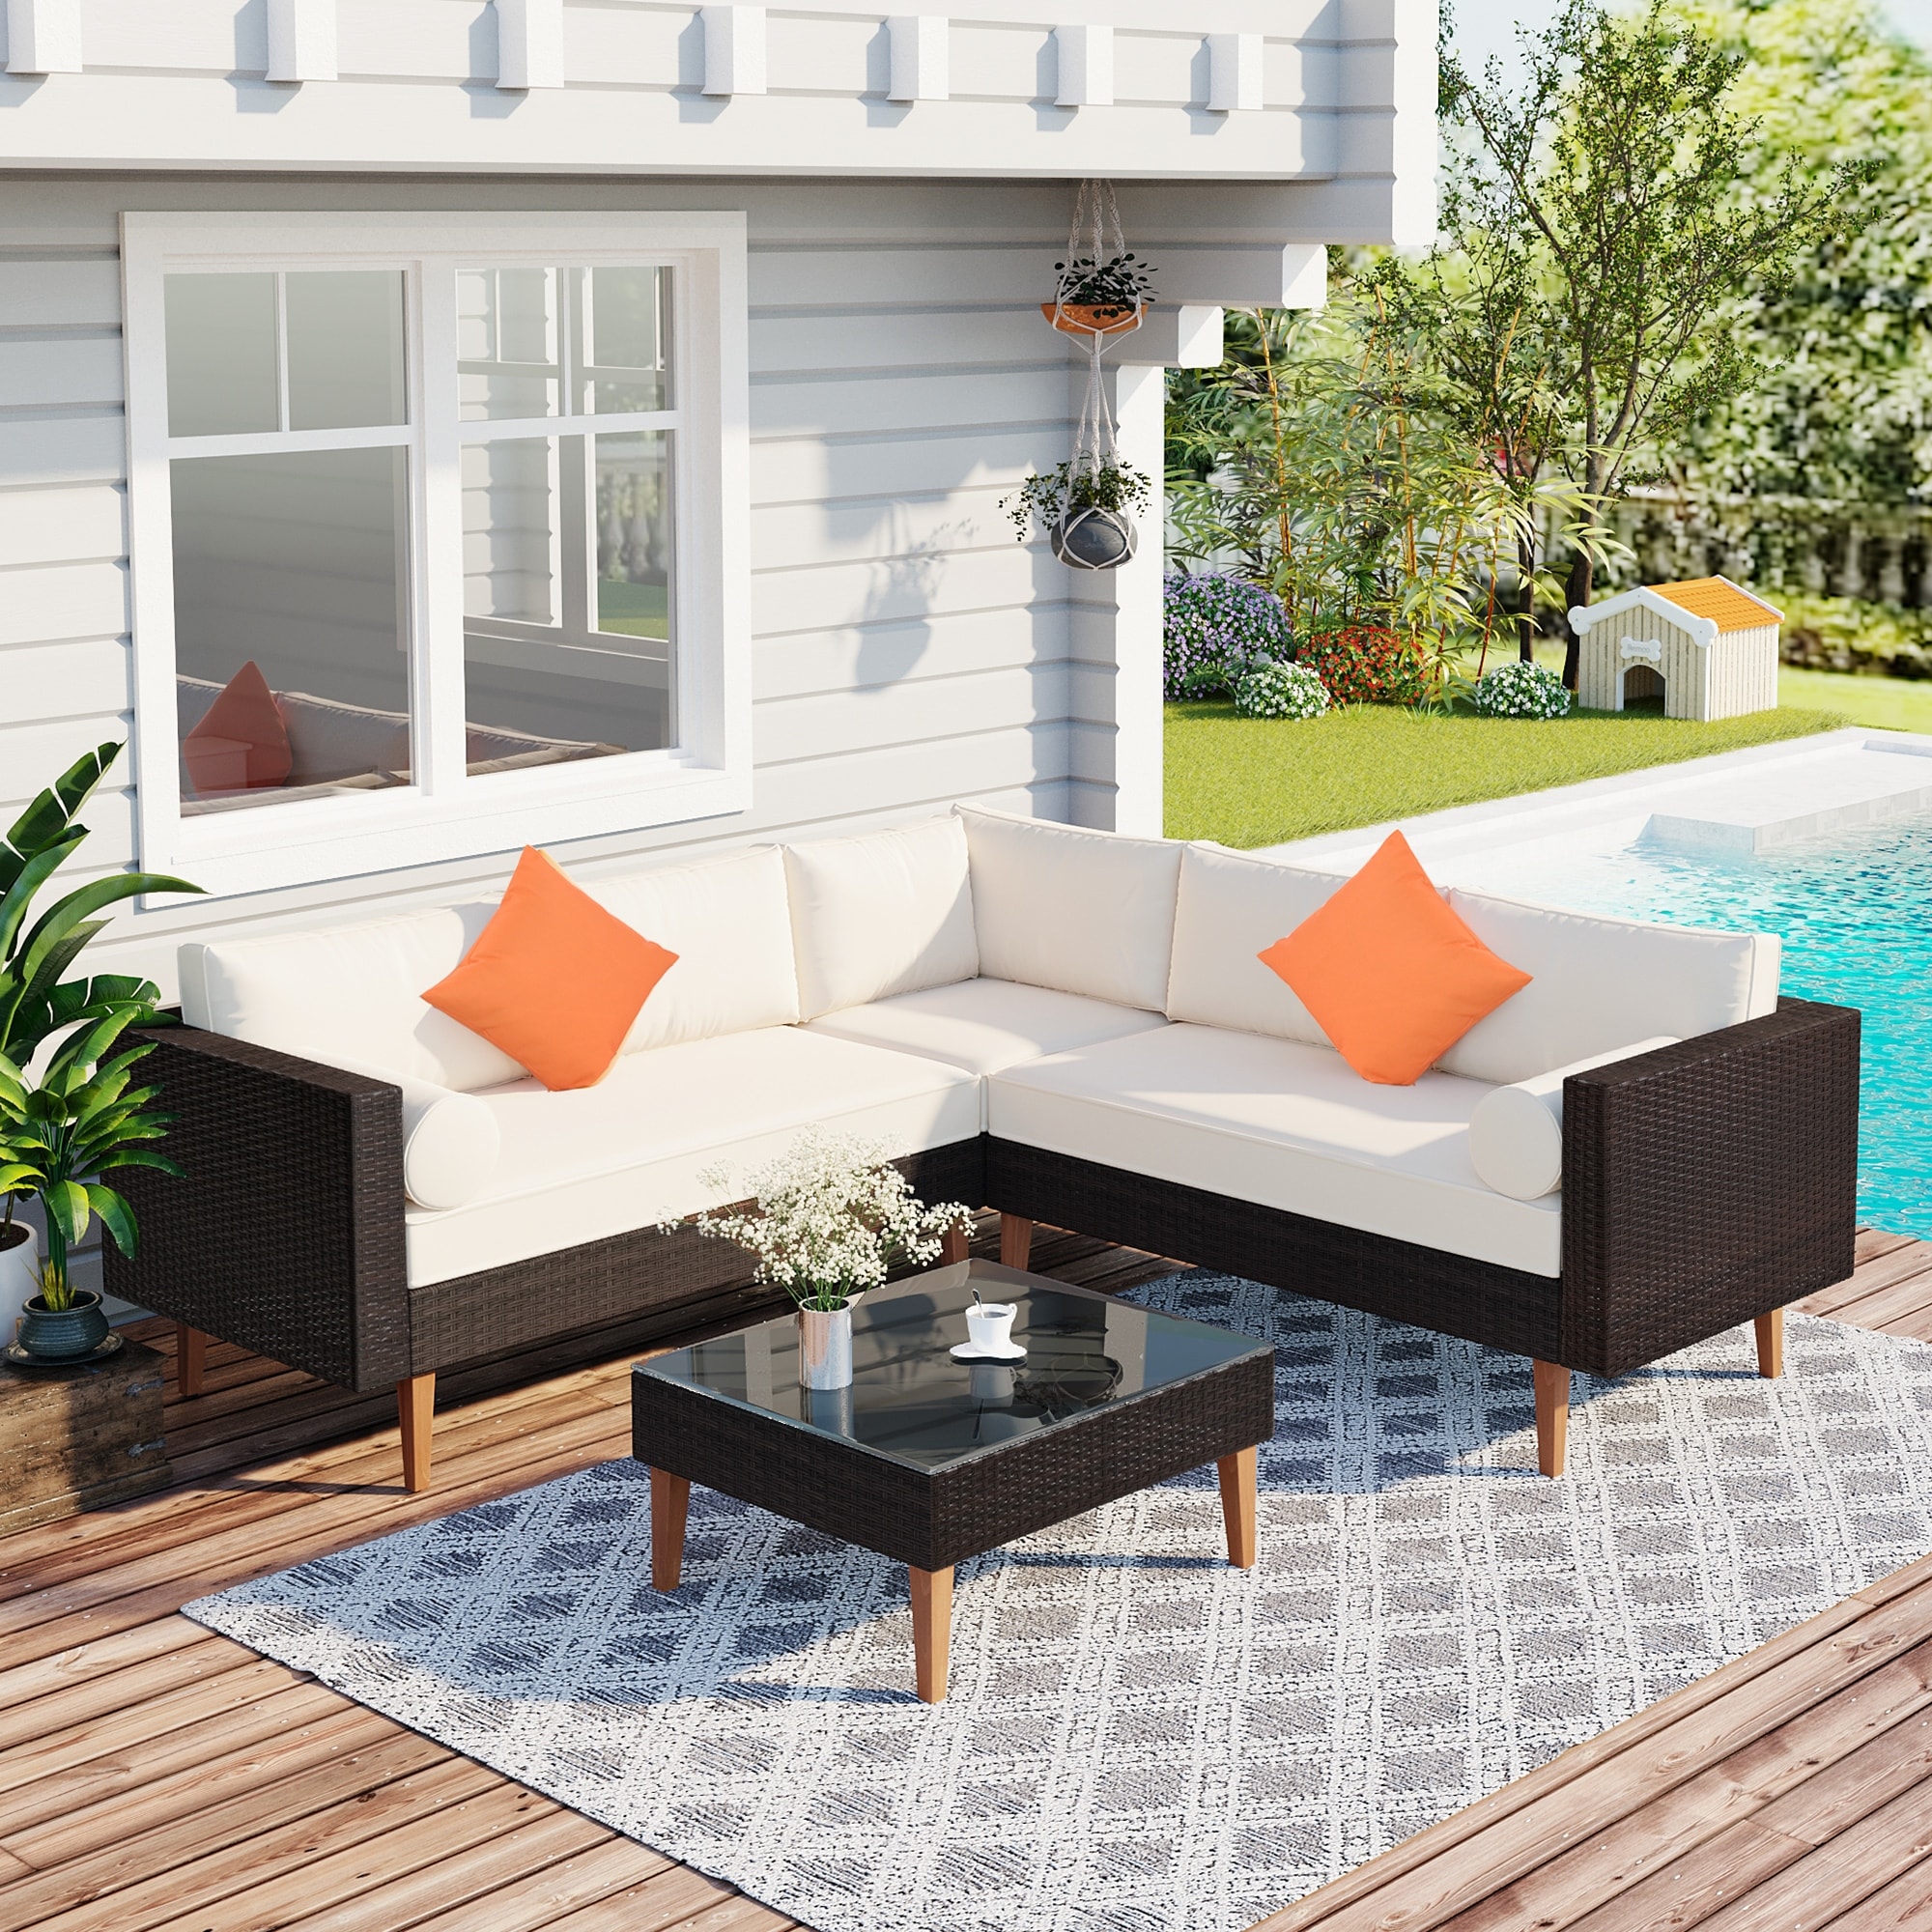 Outdoor Wicker Sofa Set  Durable Brown Rattan Patio Furniture With Colorful Pillows And Cushions